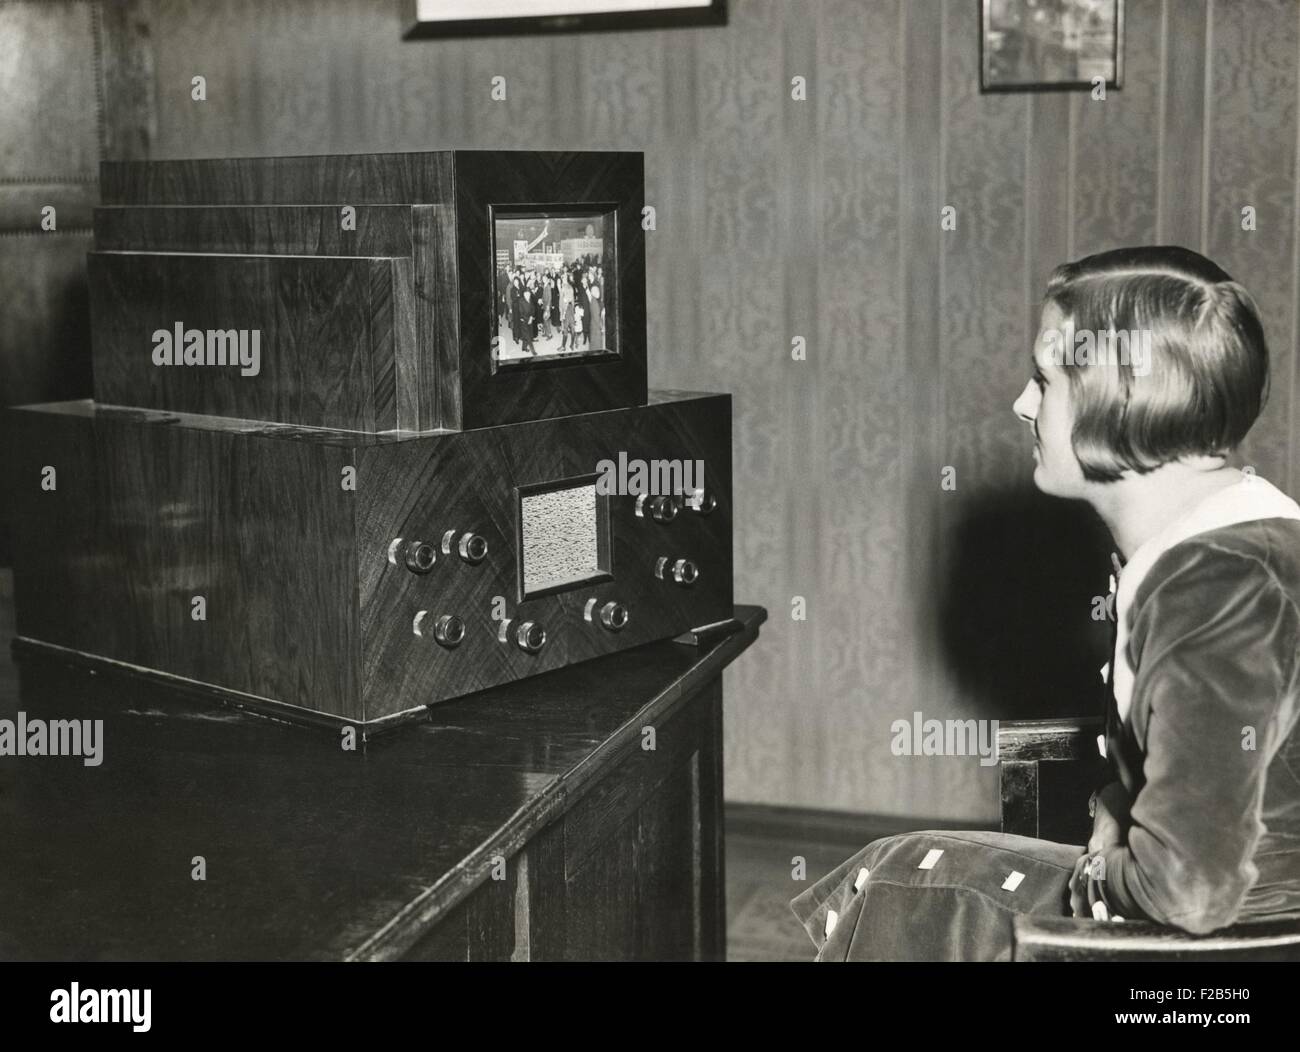 Woman watching a German television with a 14 x 18 centimeter screen. Transmission of live events was still not possible. Instead, events were filmed with moving images and these are broadcast at 25 pictures per second from a special station which possesses the necessary intense lighting. Ca. 1930. - (BSLOC 2014 17 131) Stock Photo